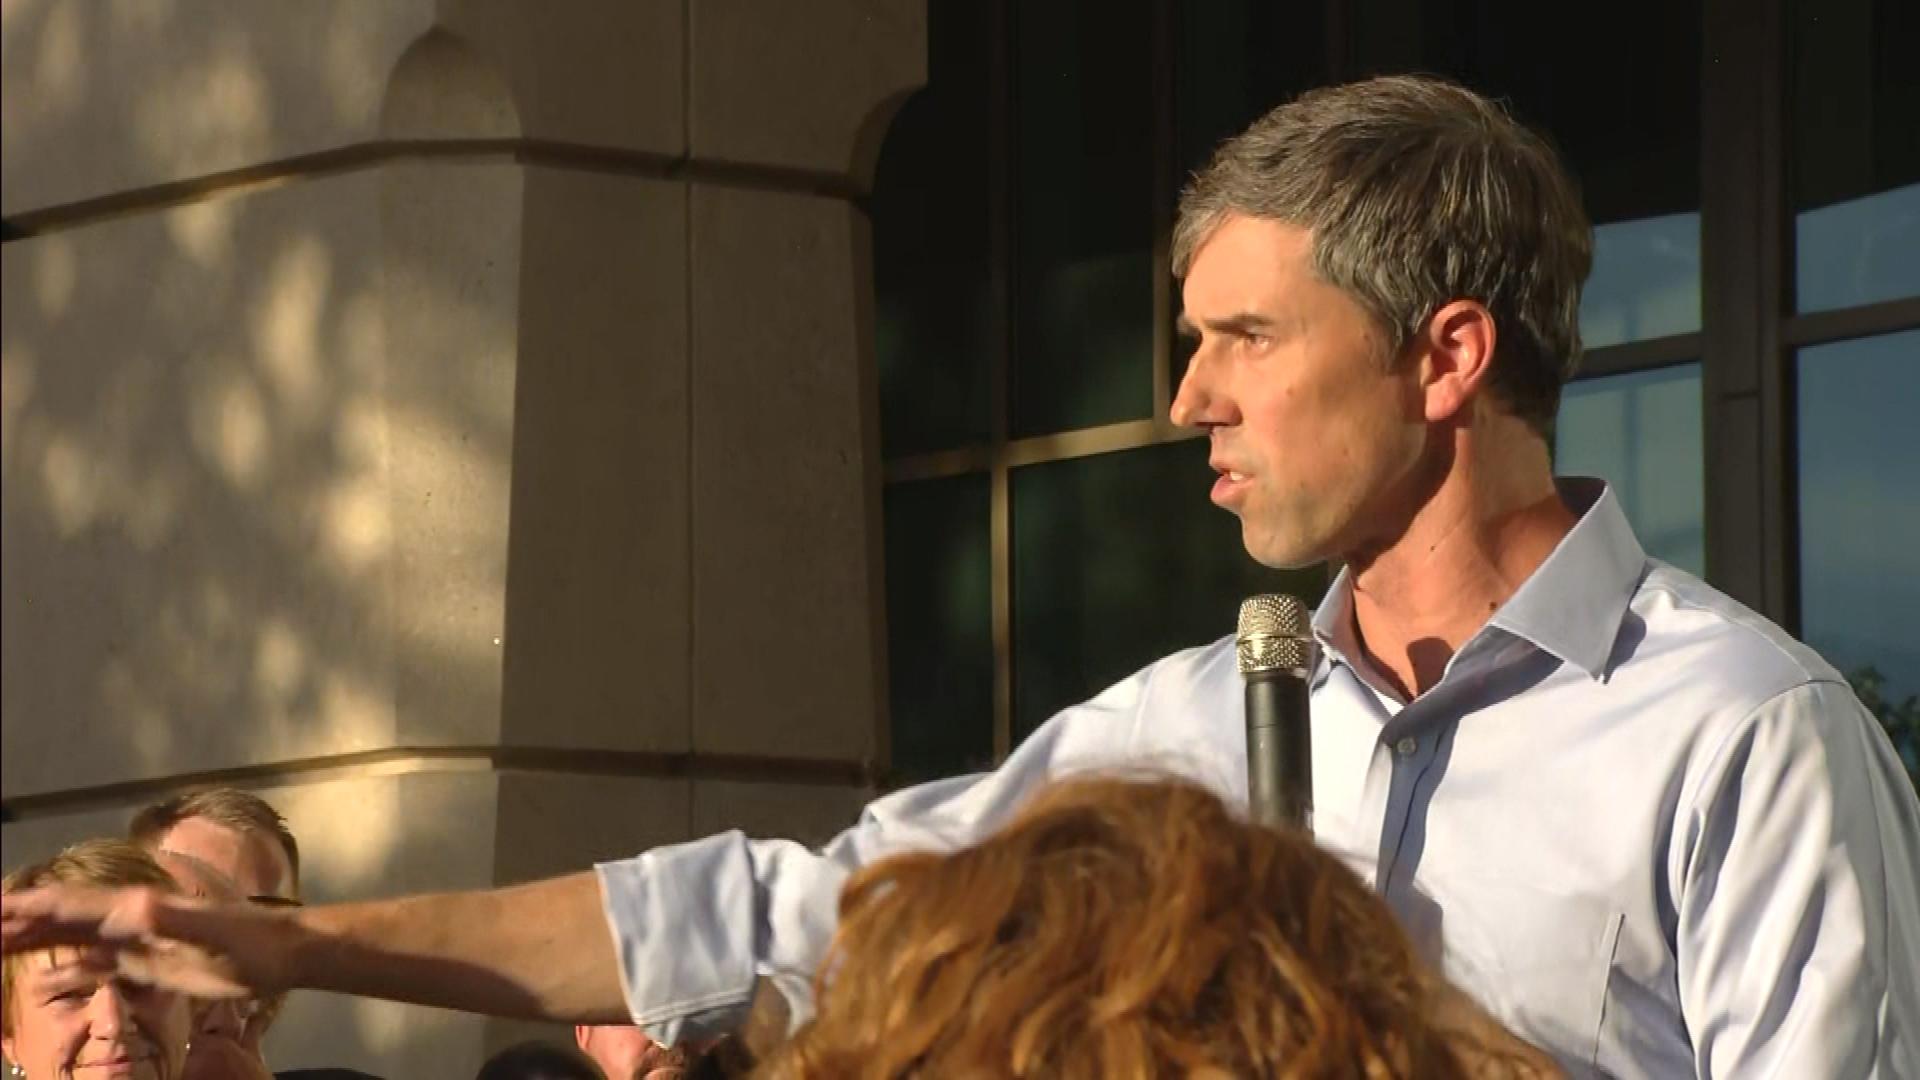 Democratic presidential candidate Beto O'Rourke during an appearance in Aurora, Colorado.